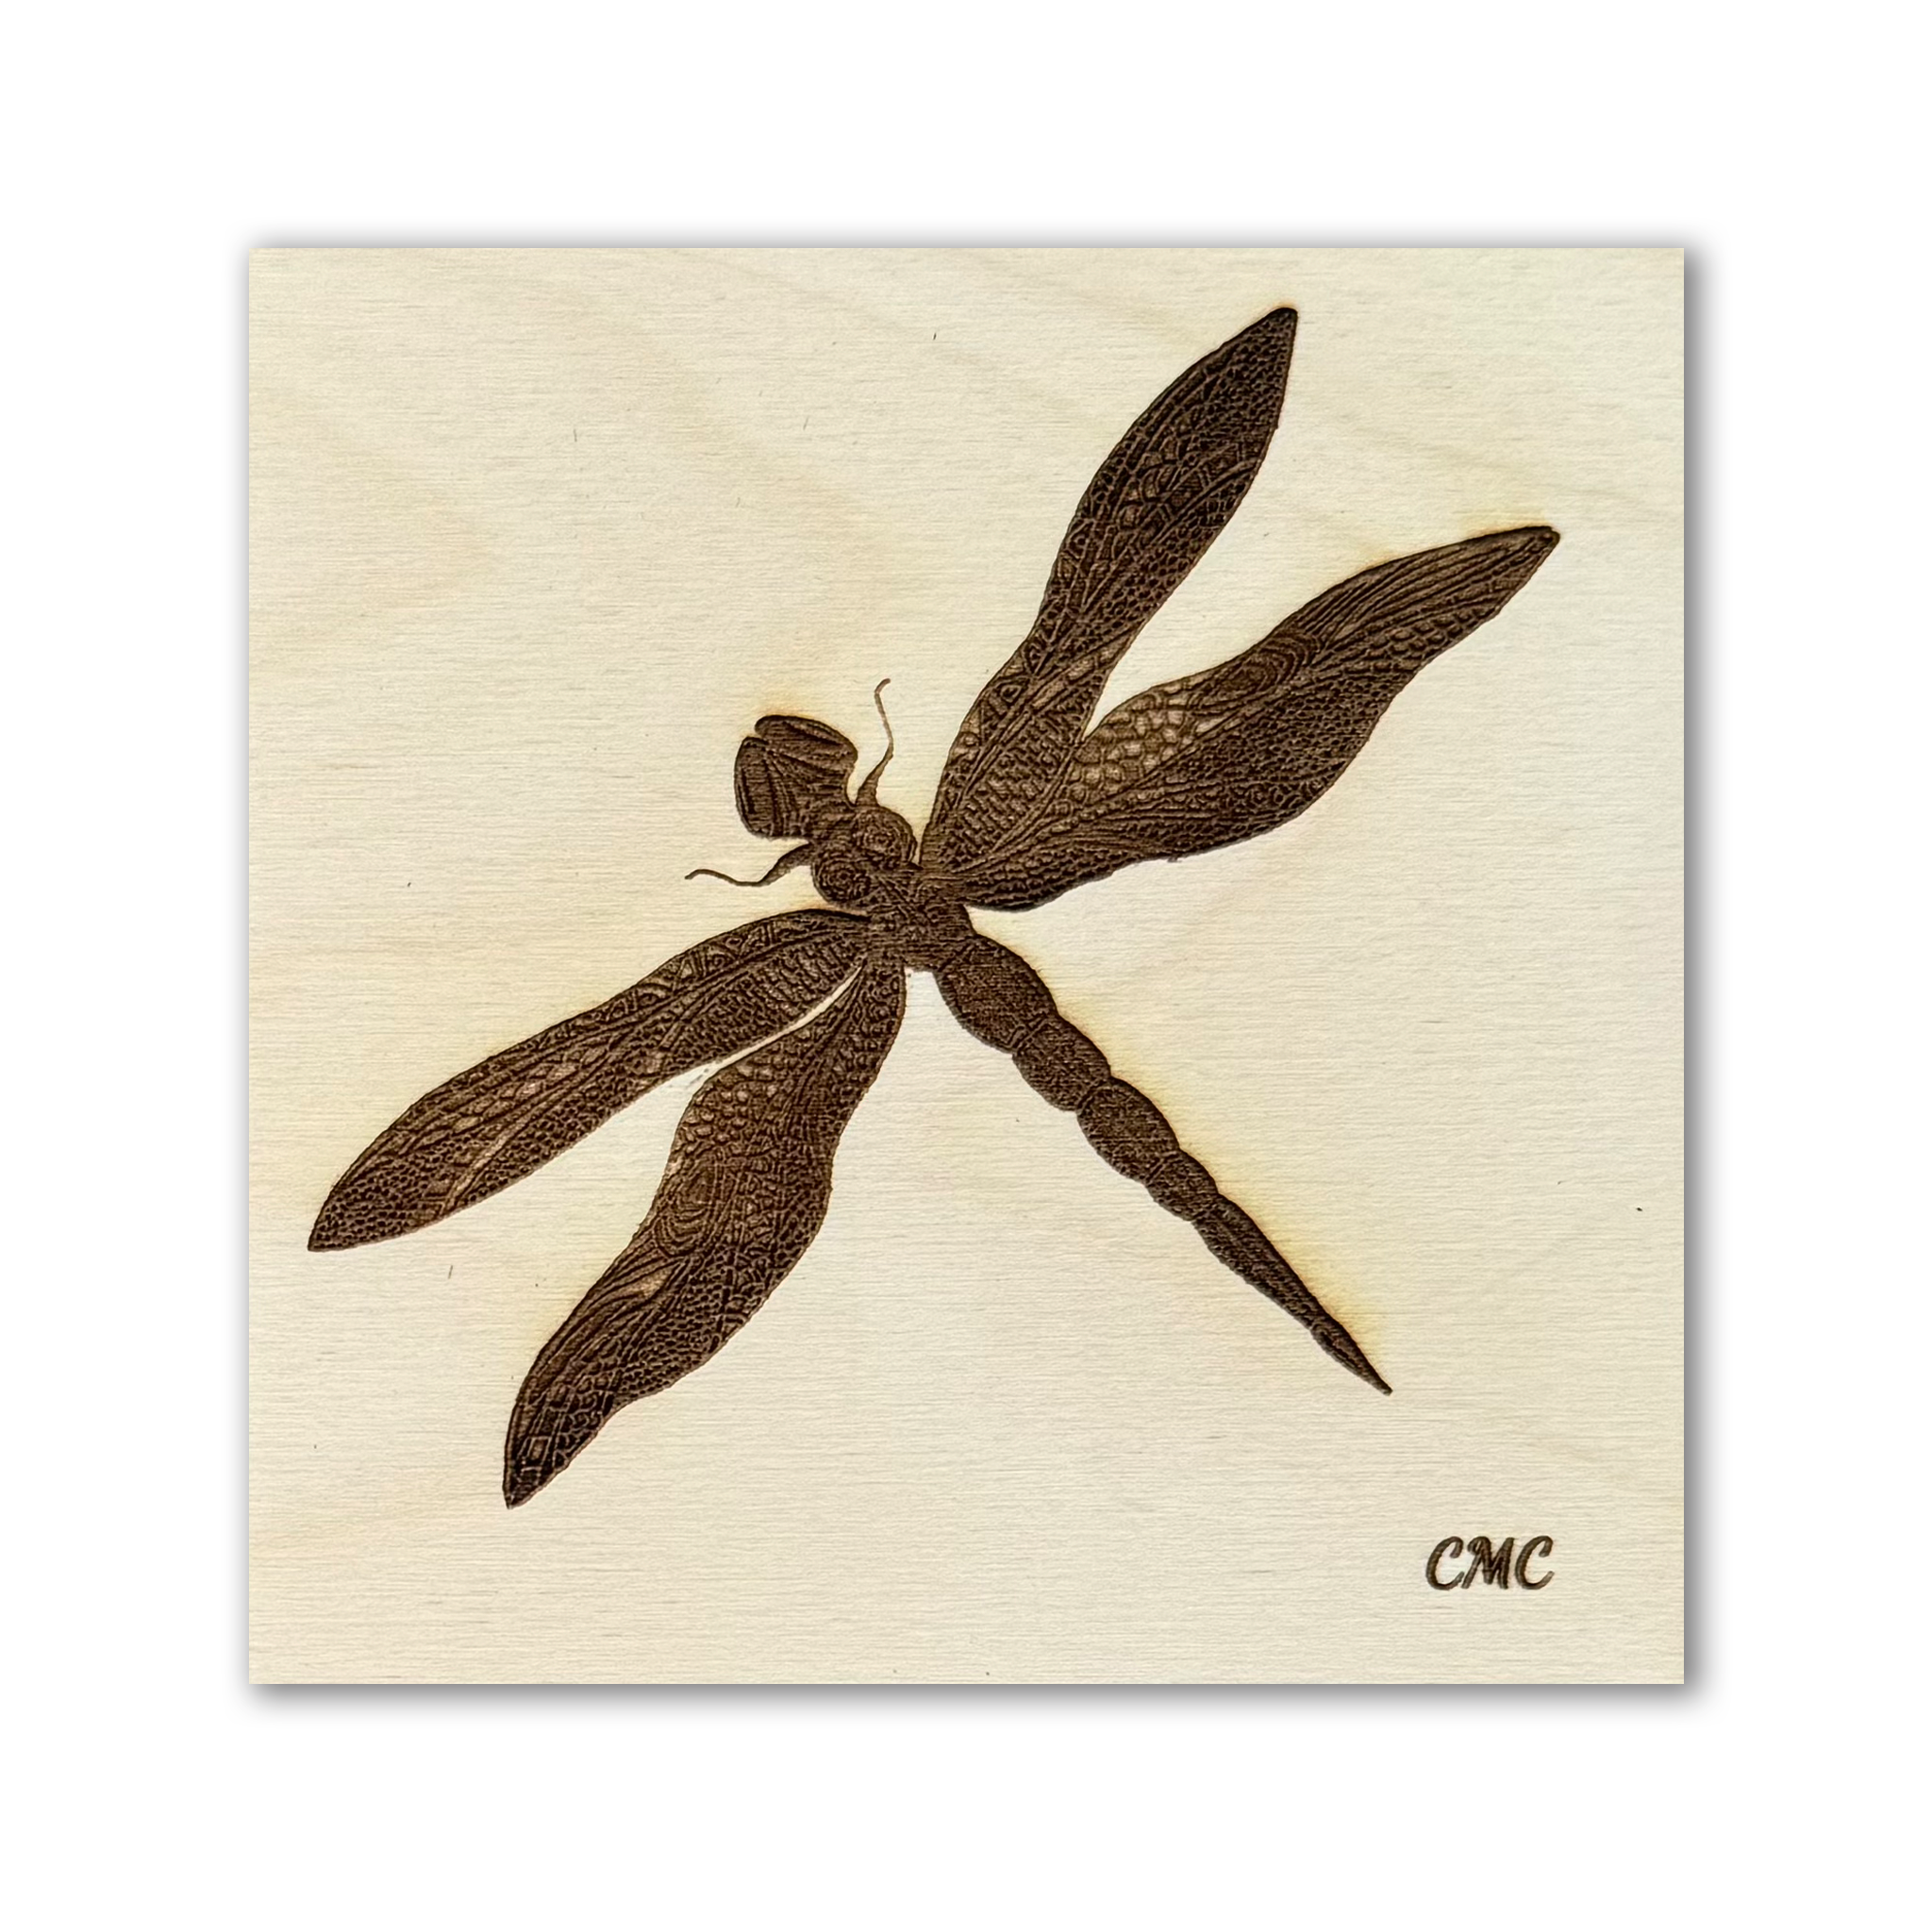 A laser engraved dragonfly on a natural baltic birch art tile 